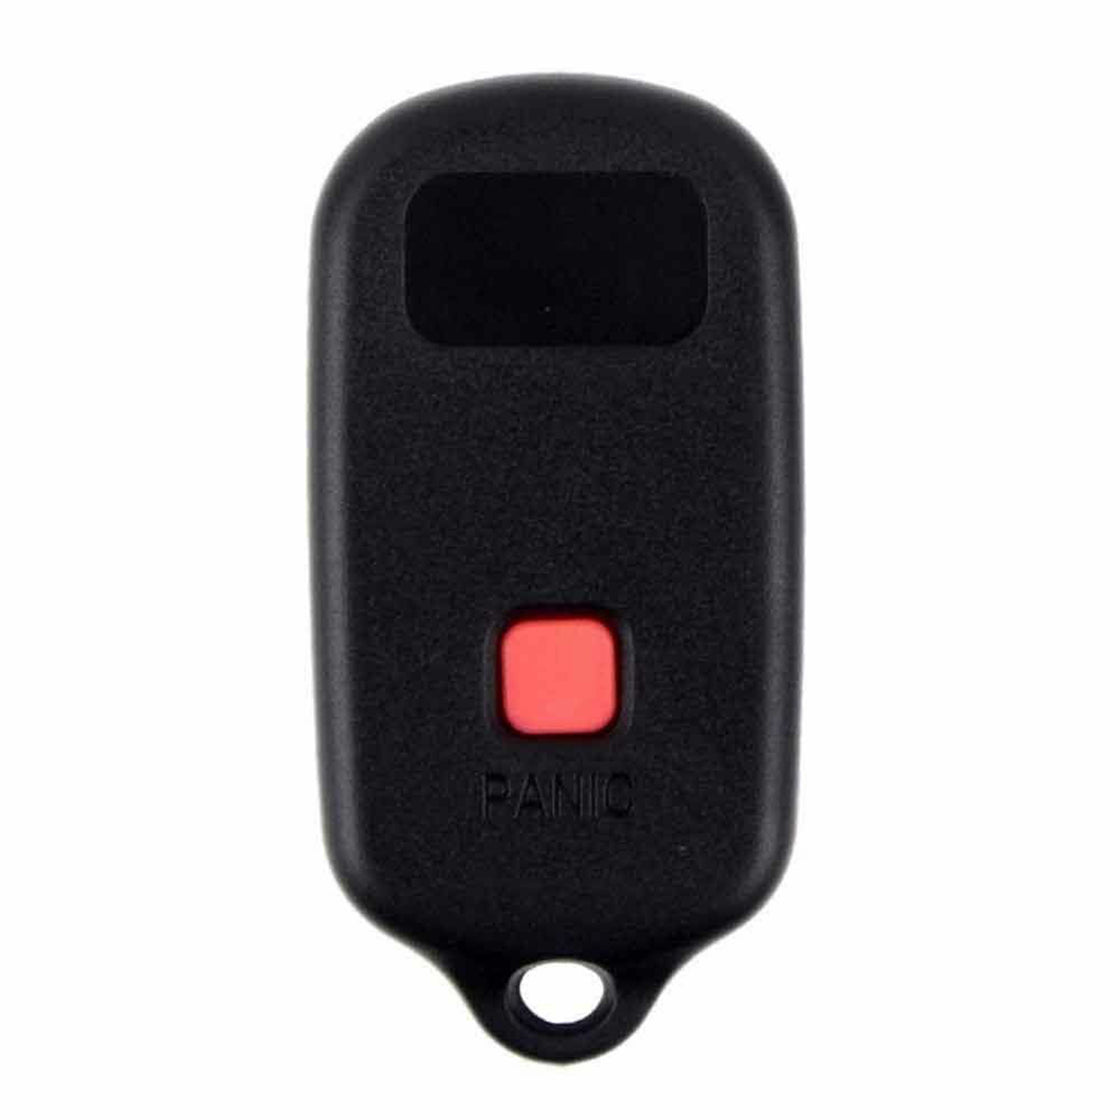 1x New Replacement Keyless Entry Remote Control Key Fob Compatible with and Fit for Toyota - MPN HYQ12BBX